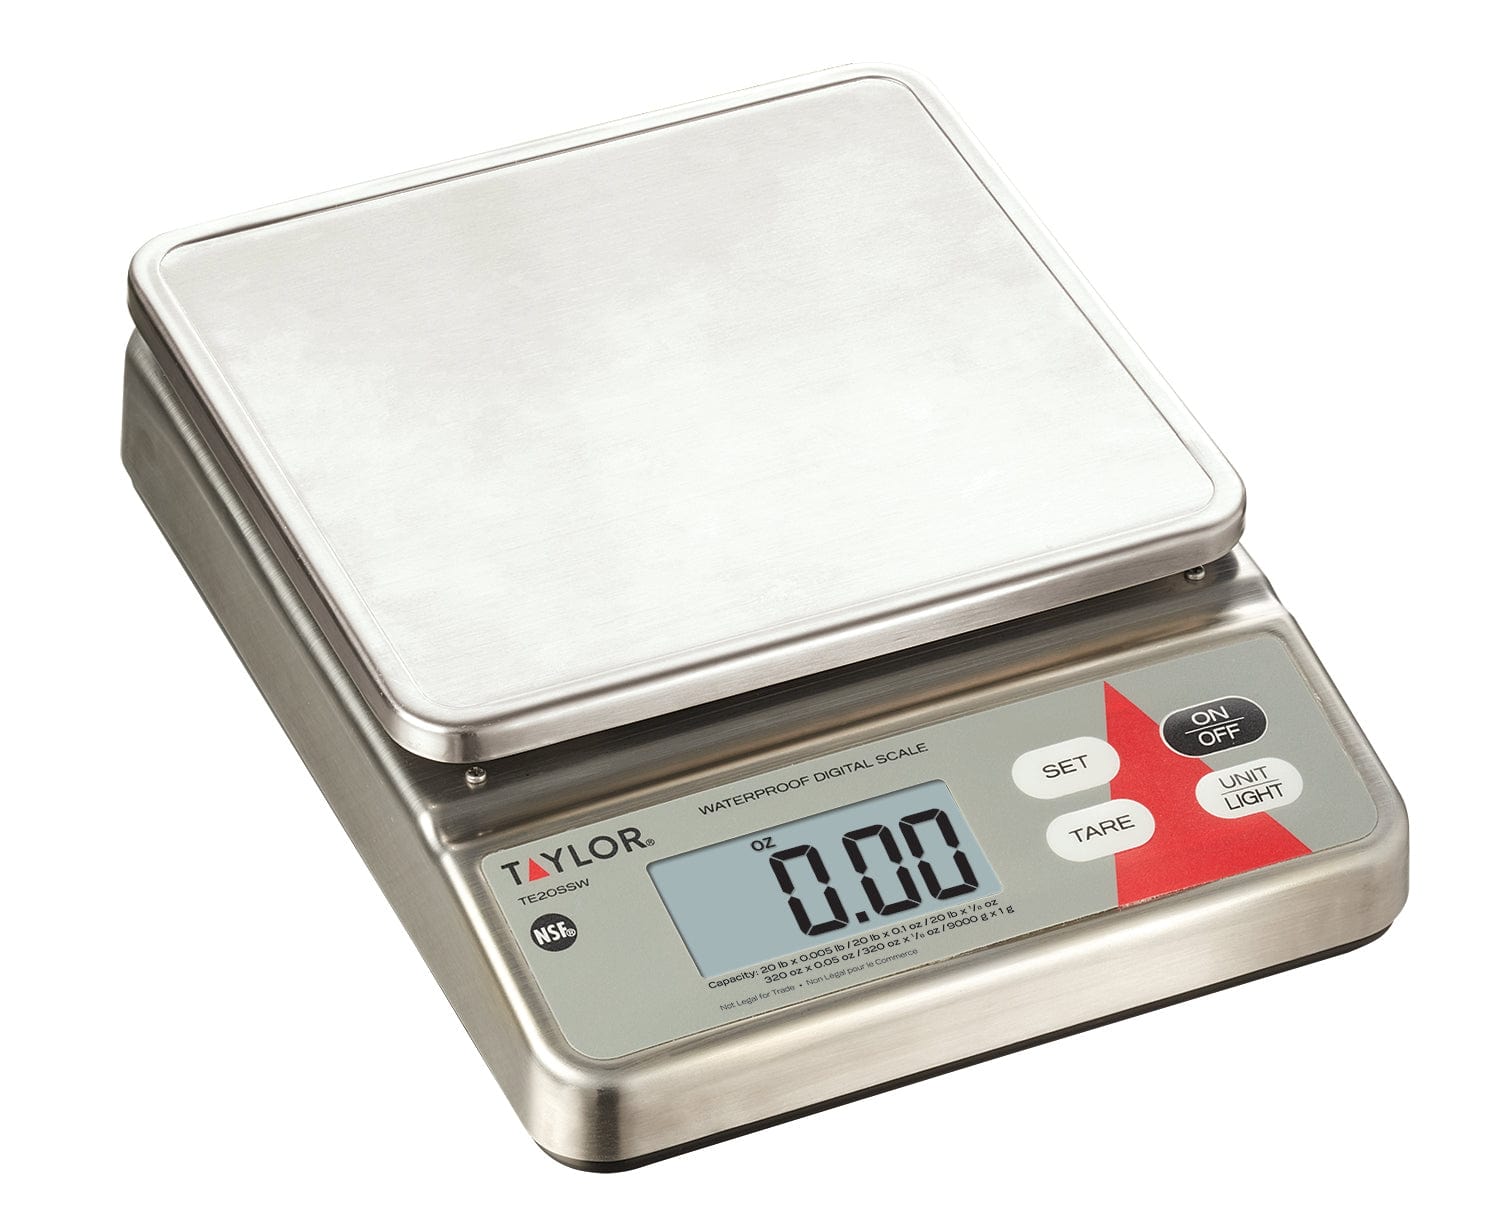 Taylor High-Precision Digital Portioning Scale with Cover, Black